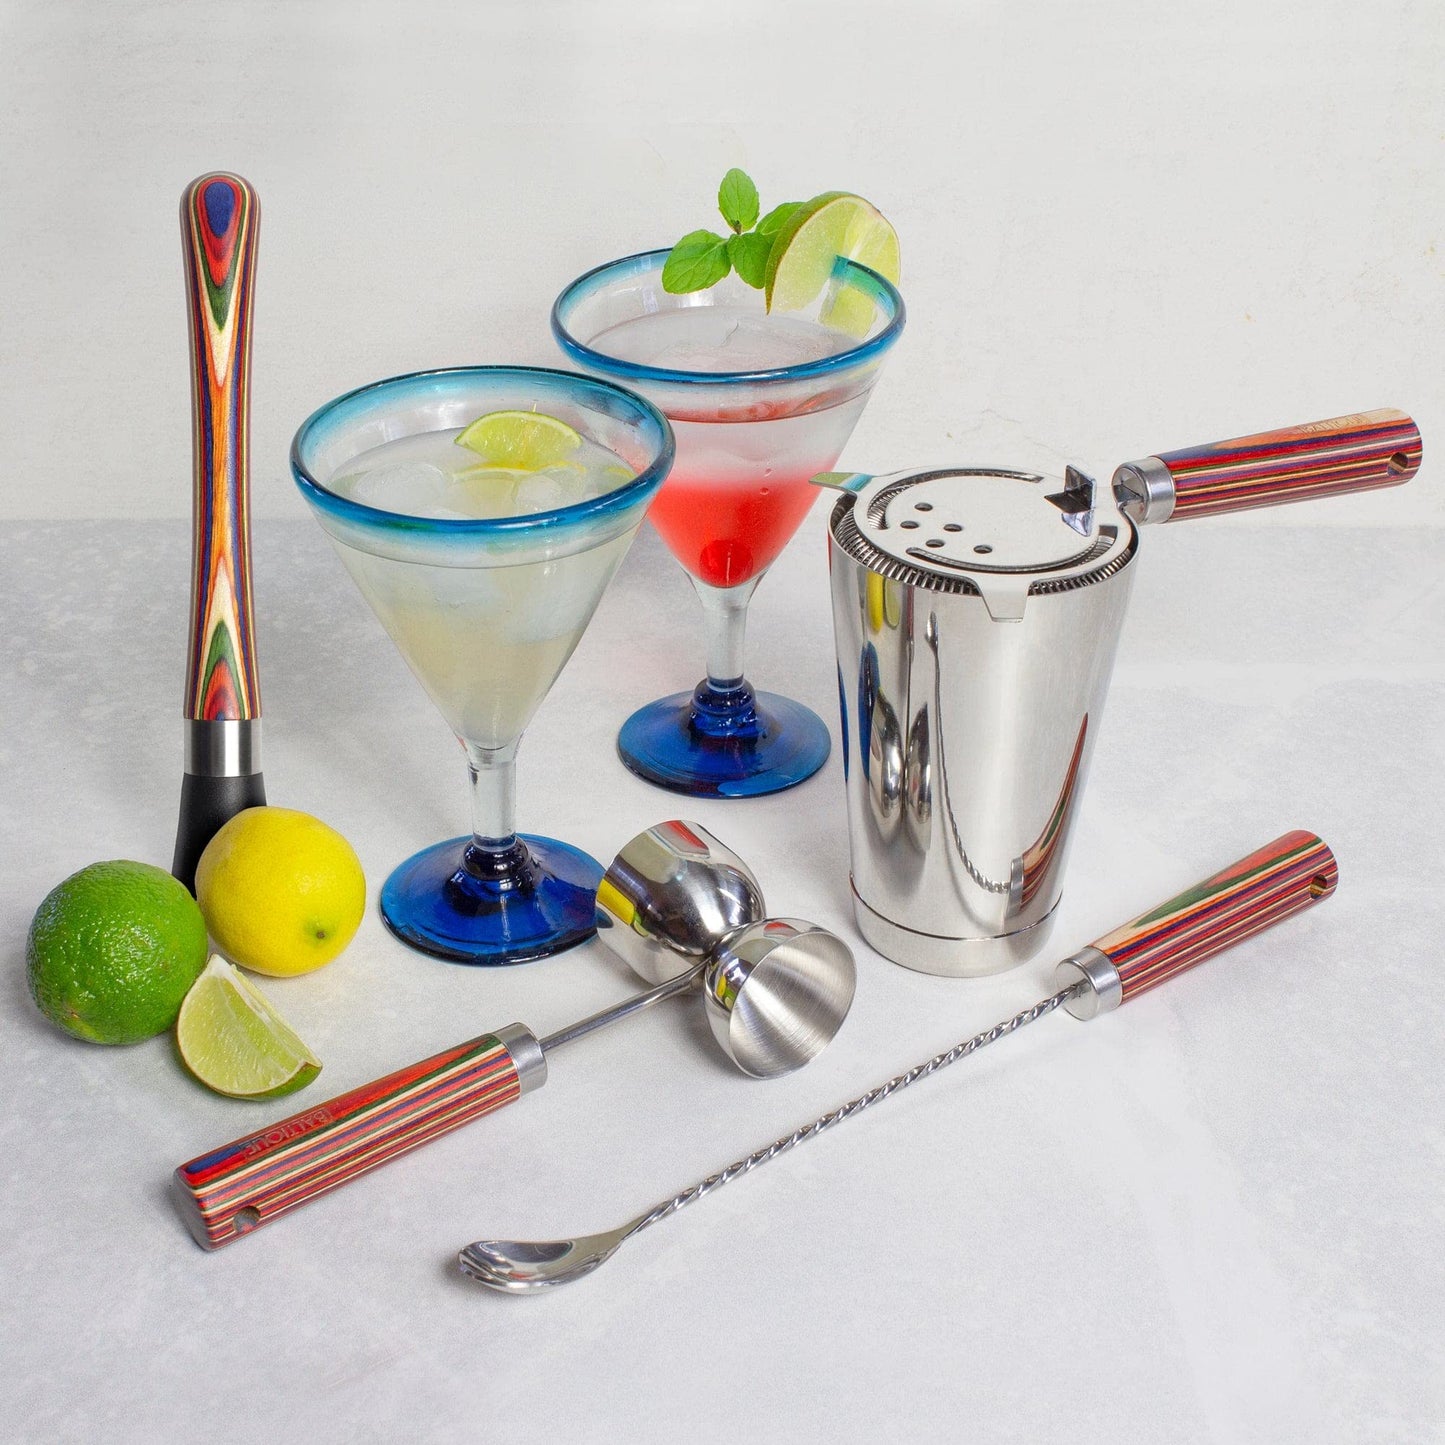 Baltique Marrakesh 4 Piece Bartender Kit, Bartending Gift Set with Essential Bar Accessory Tools, Includes Muddler, Double Sided Jigger, Hawthorne Cocktail Strainer and Bar Spoon